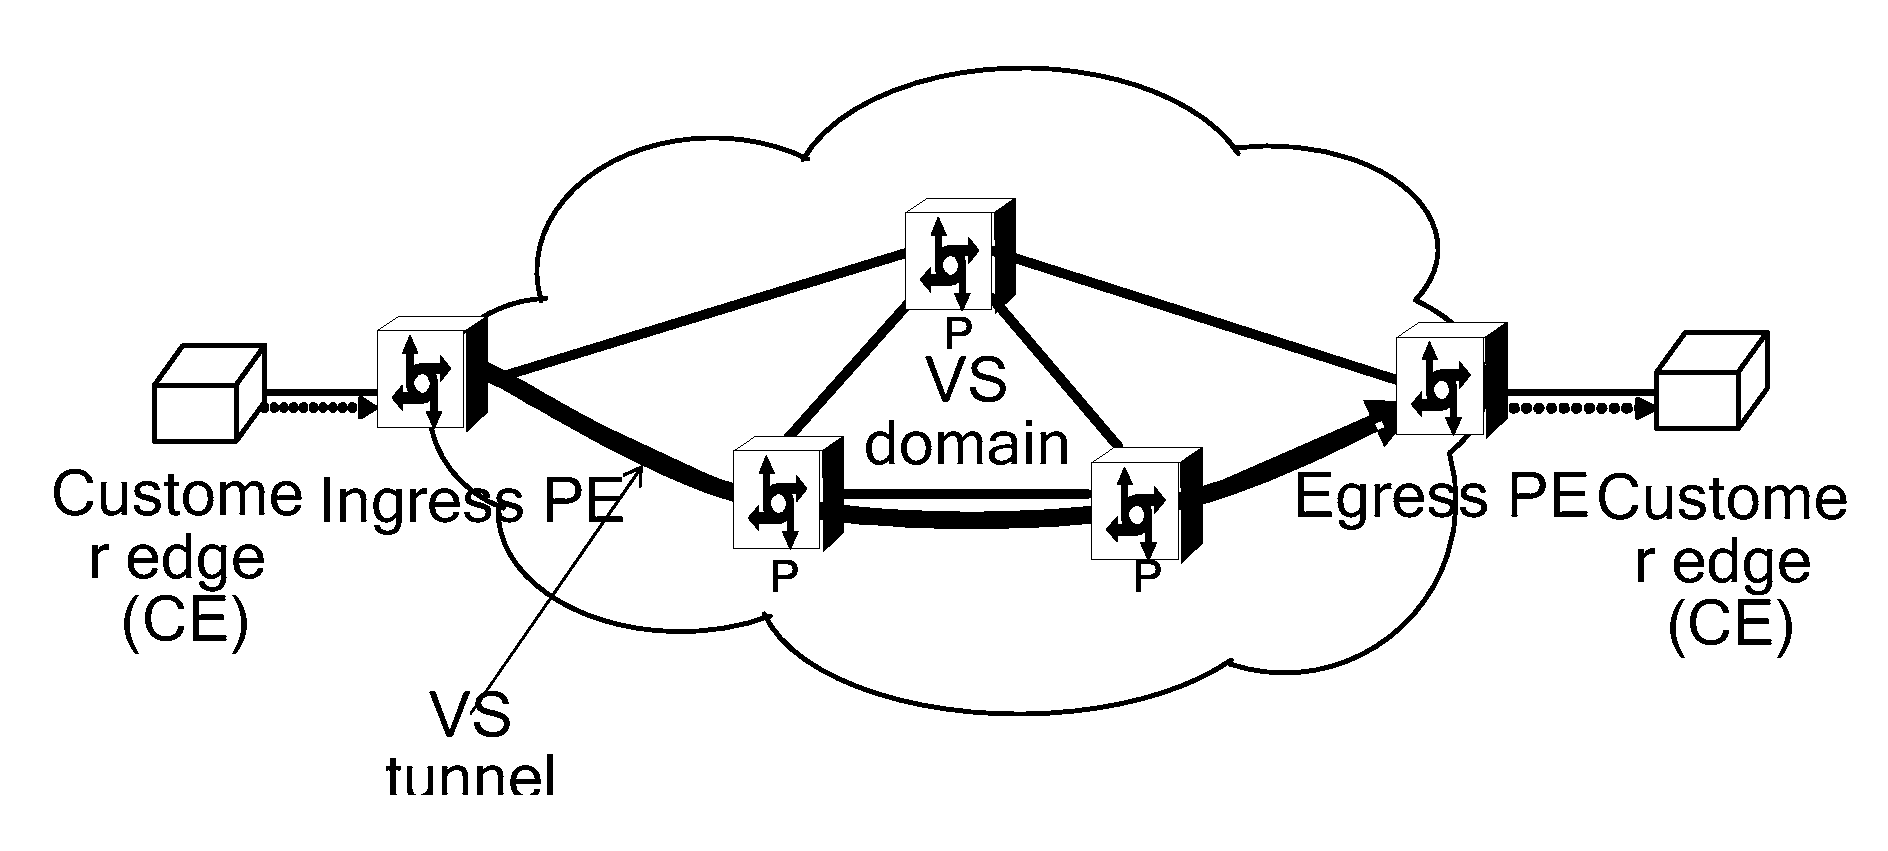 Multiplex method of VLAN switching tunnel and VLAN switching system